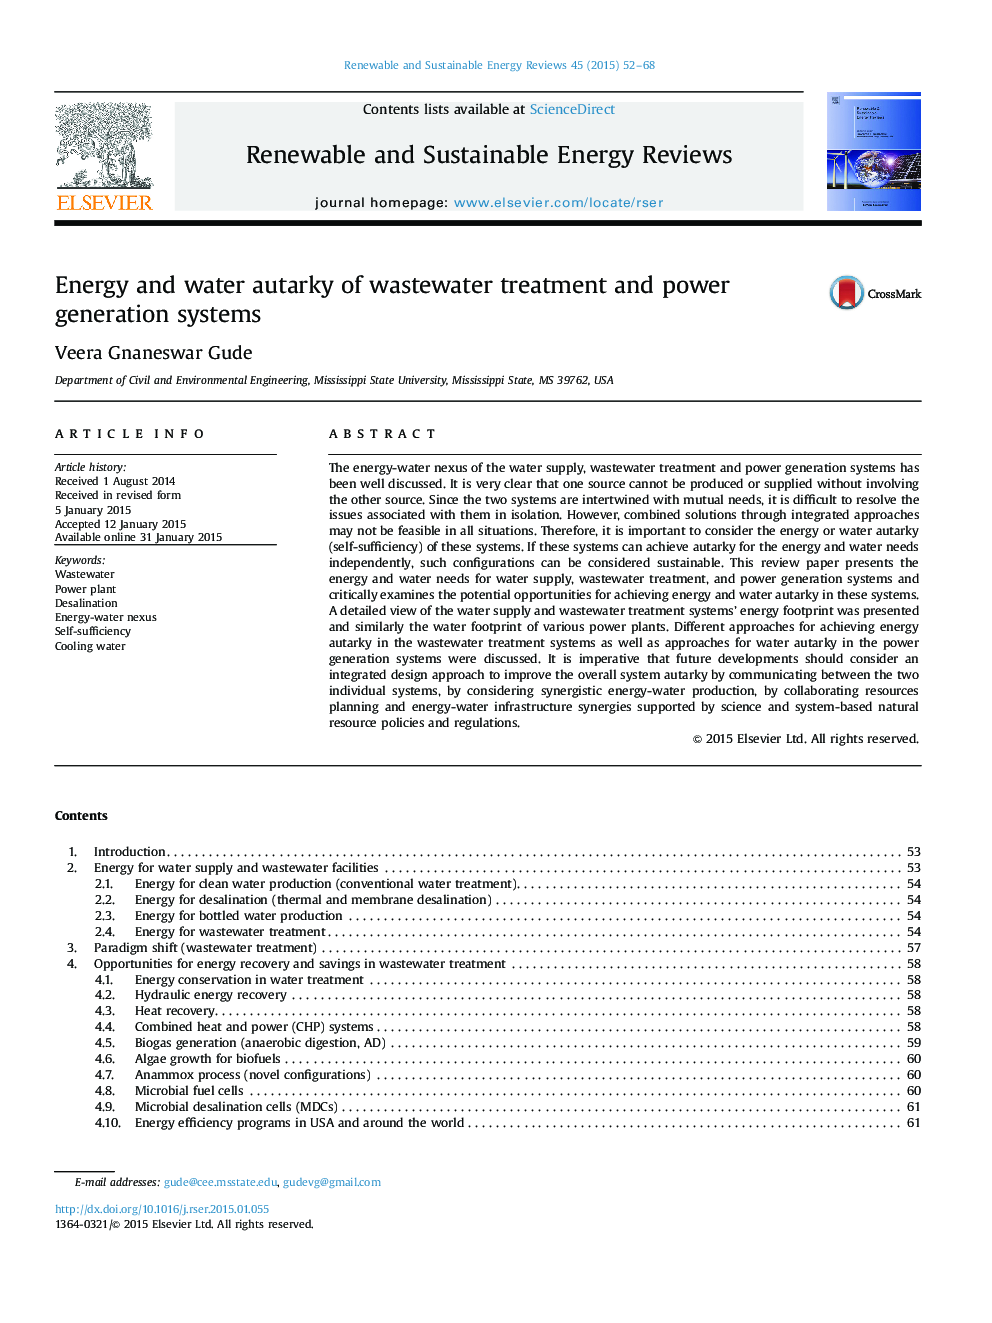 Energy and water autarky of wastewater treatment and power generation systems